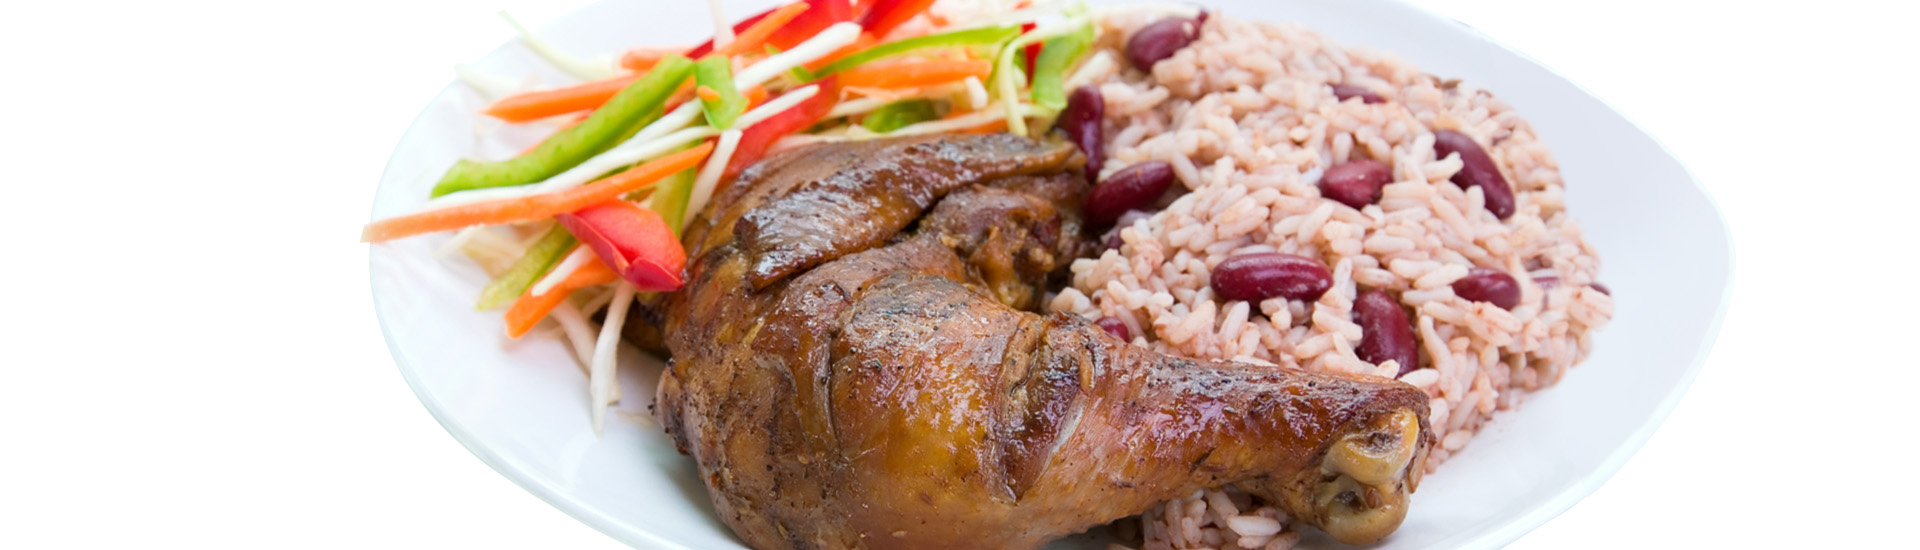 Caribbean Style Jerk Chicken Served with Rice Mixed